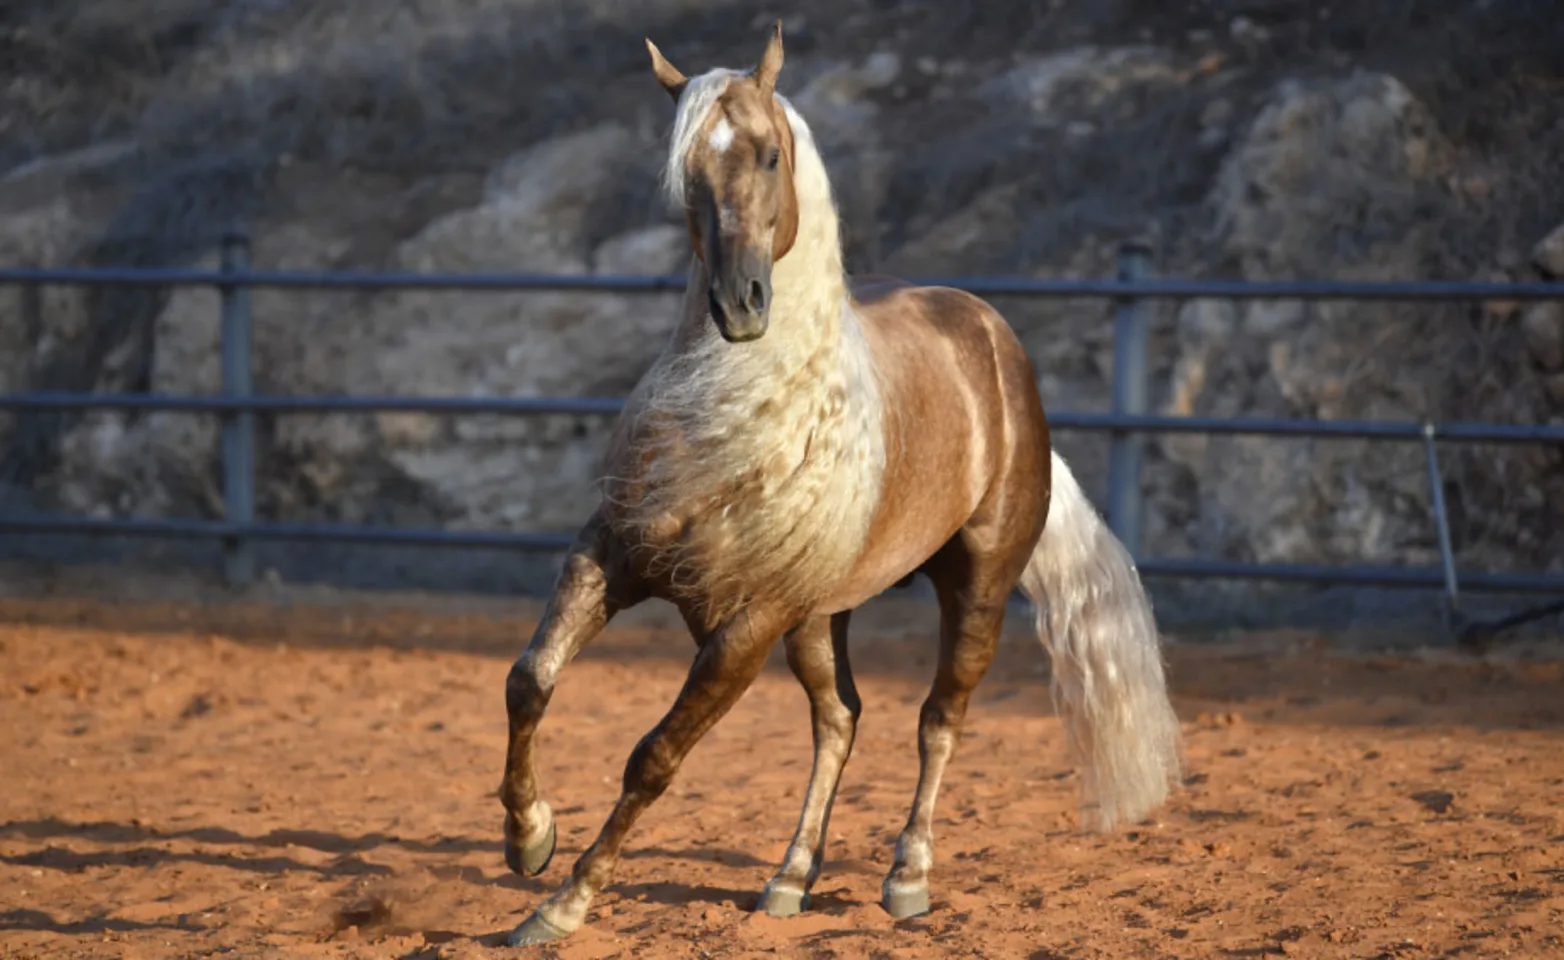 Brown horse with blonde mane standing in dirt pen.